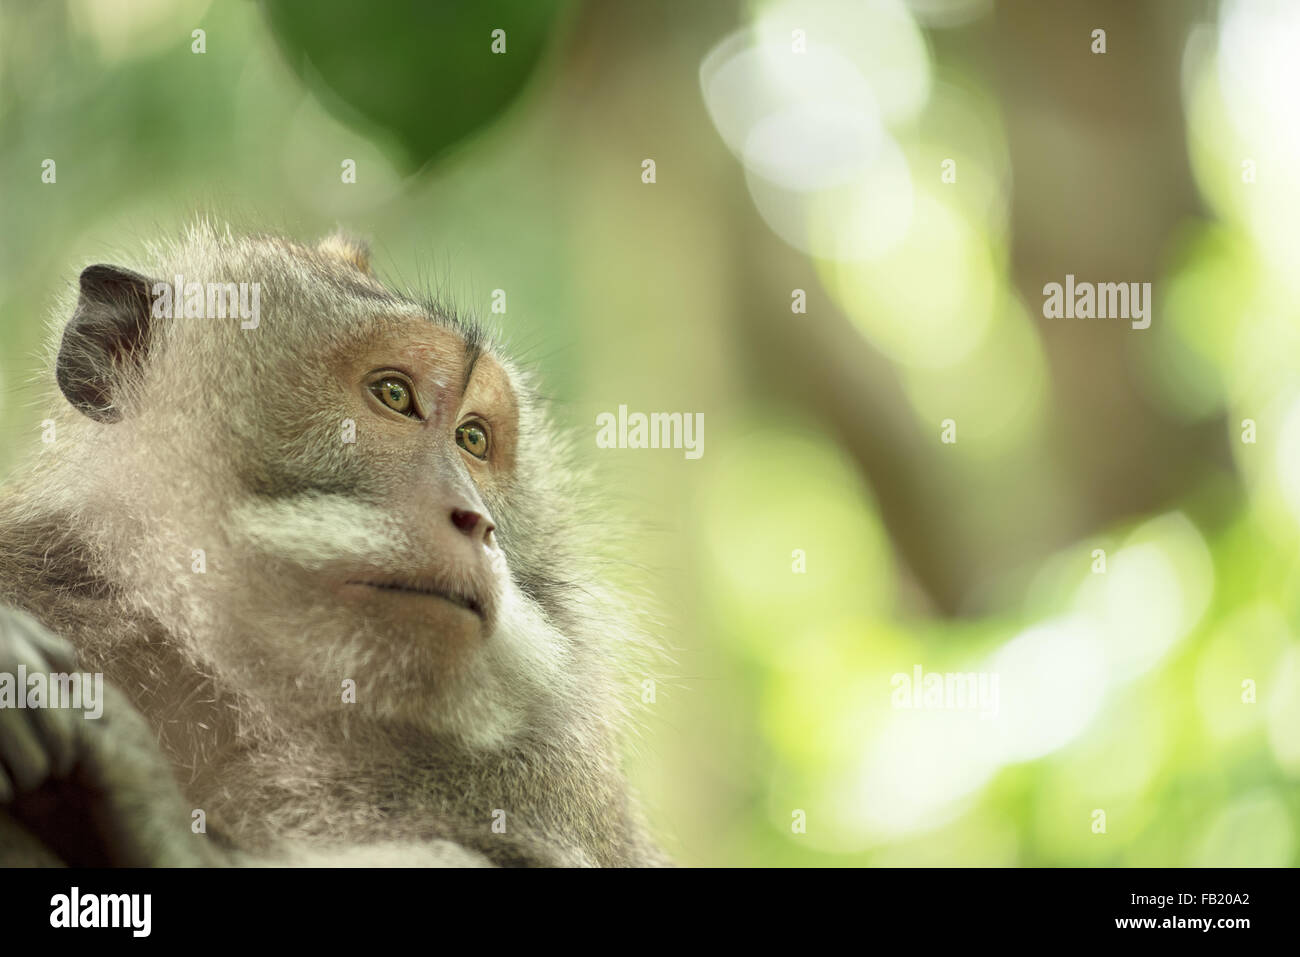 Face portrait of wild monkey in natural habitat. Wildlife conservation and animal rights campaign. Stock Photo